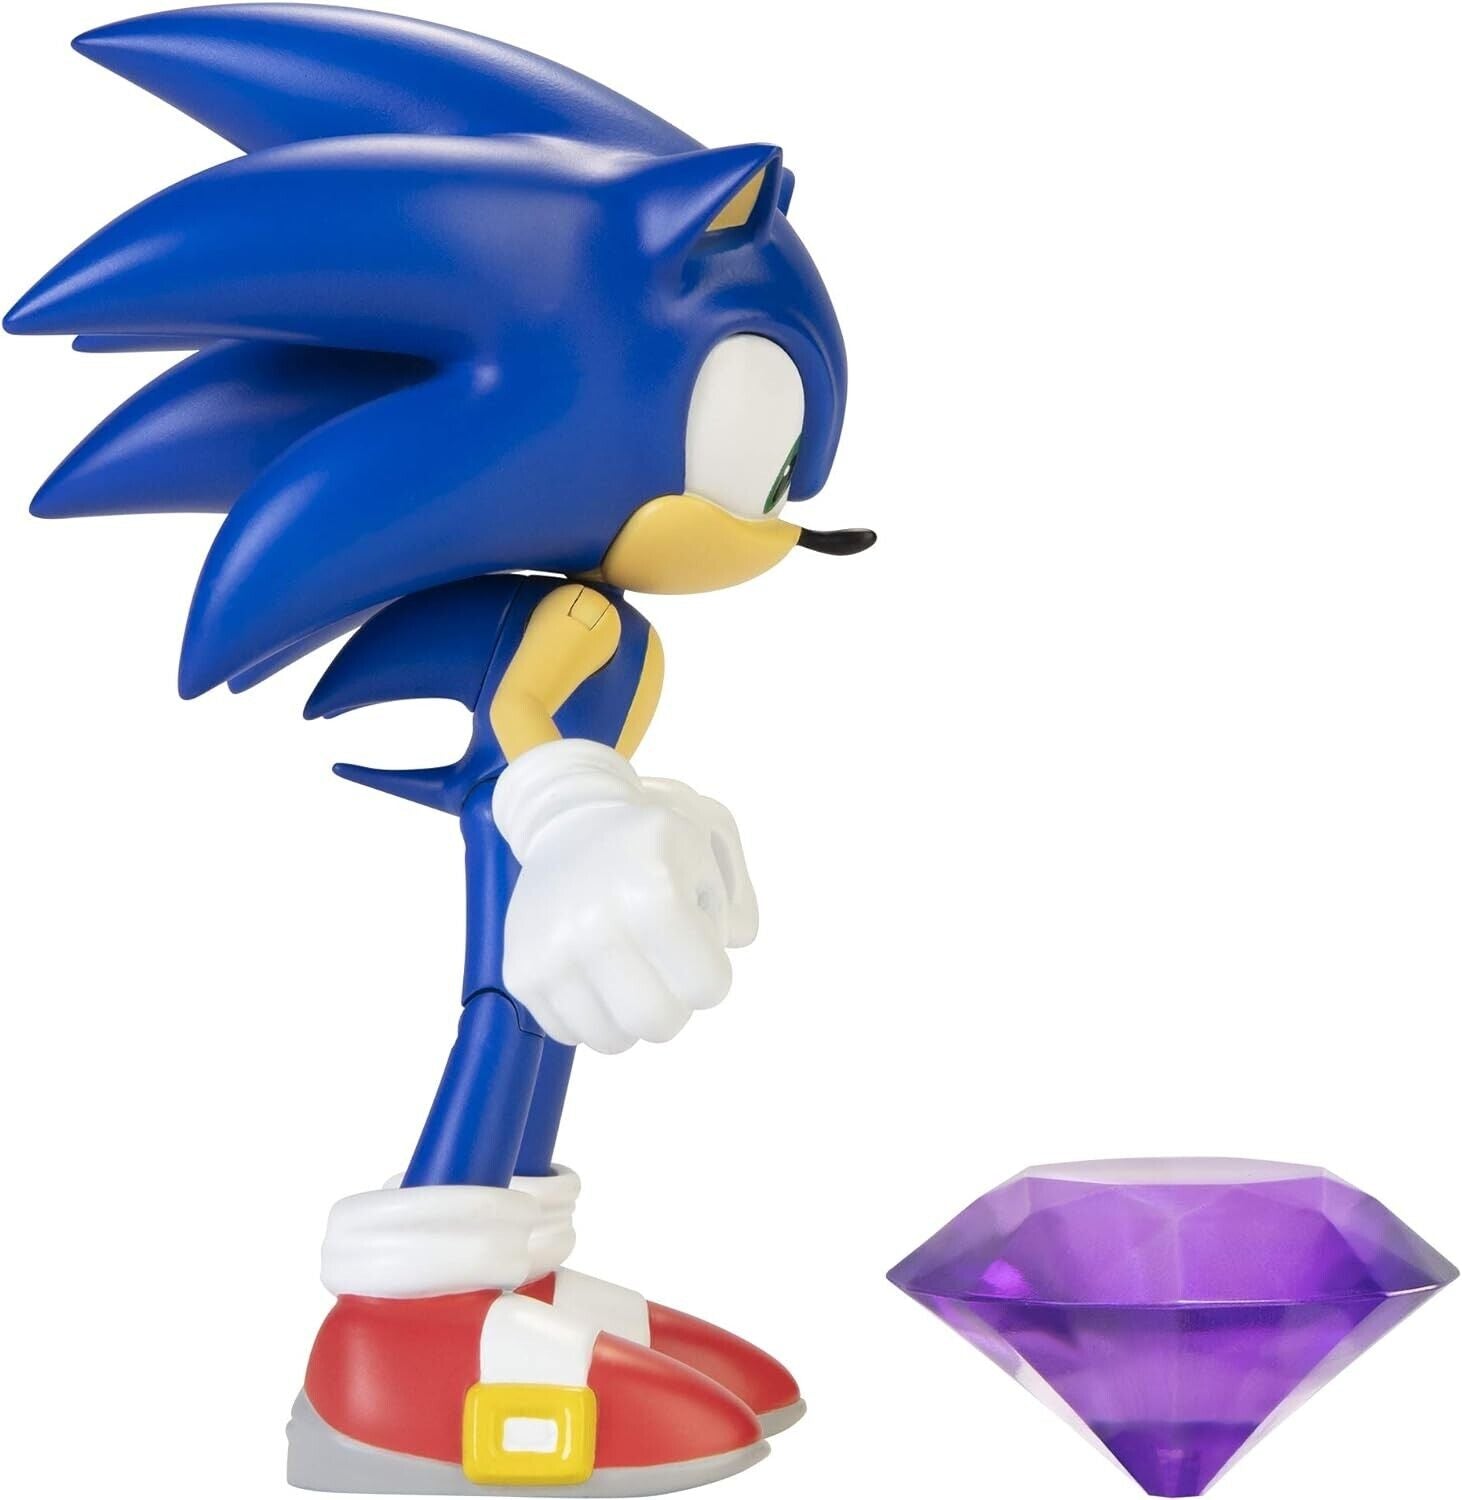 JAKKS Pacific Sonic the Hedgehog 4" Action Figure with Chaos Emerald